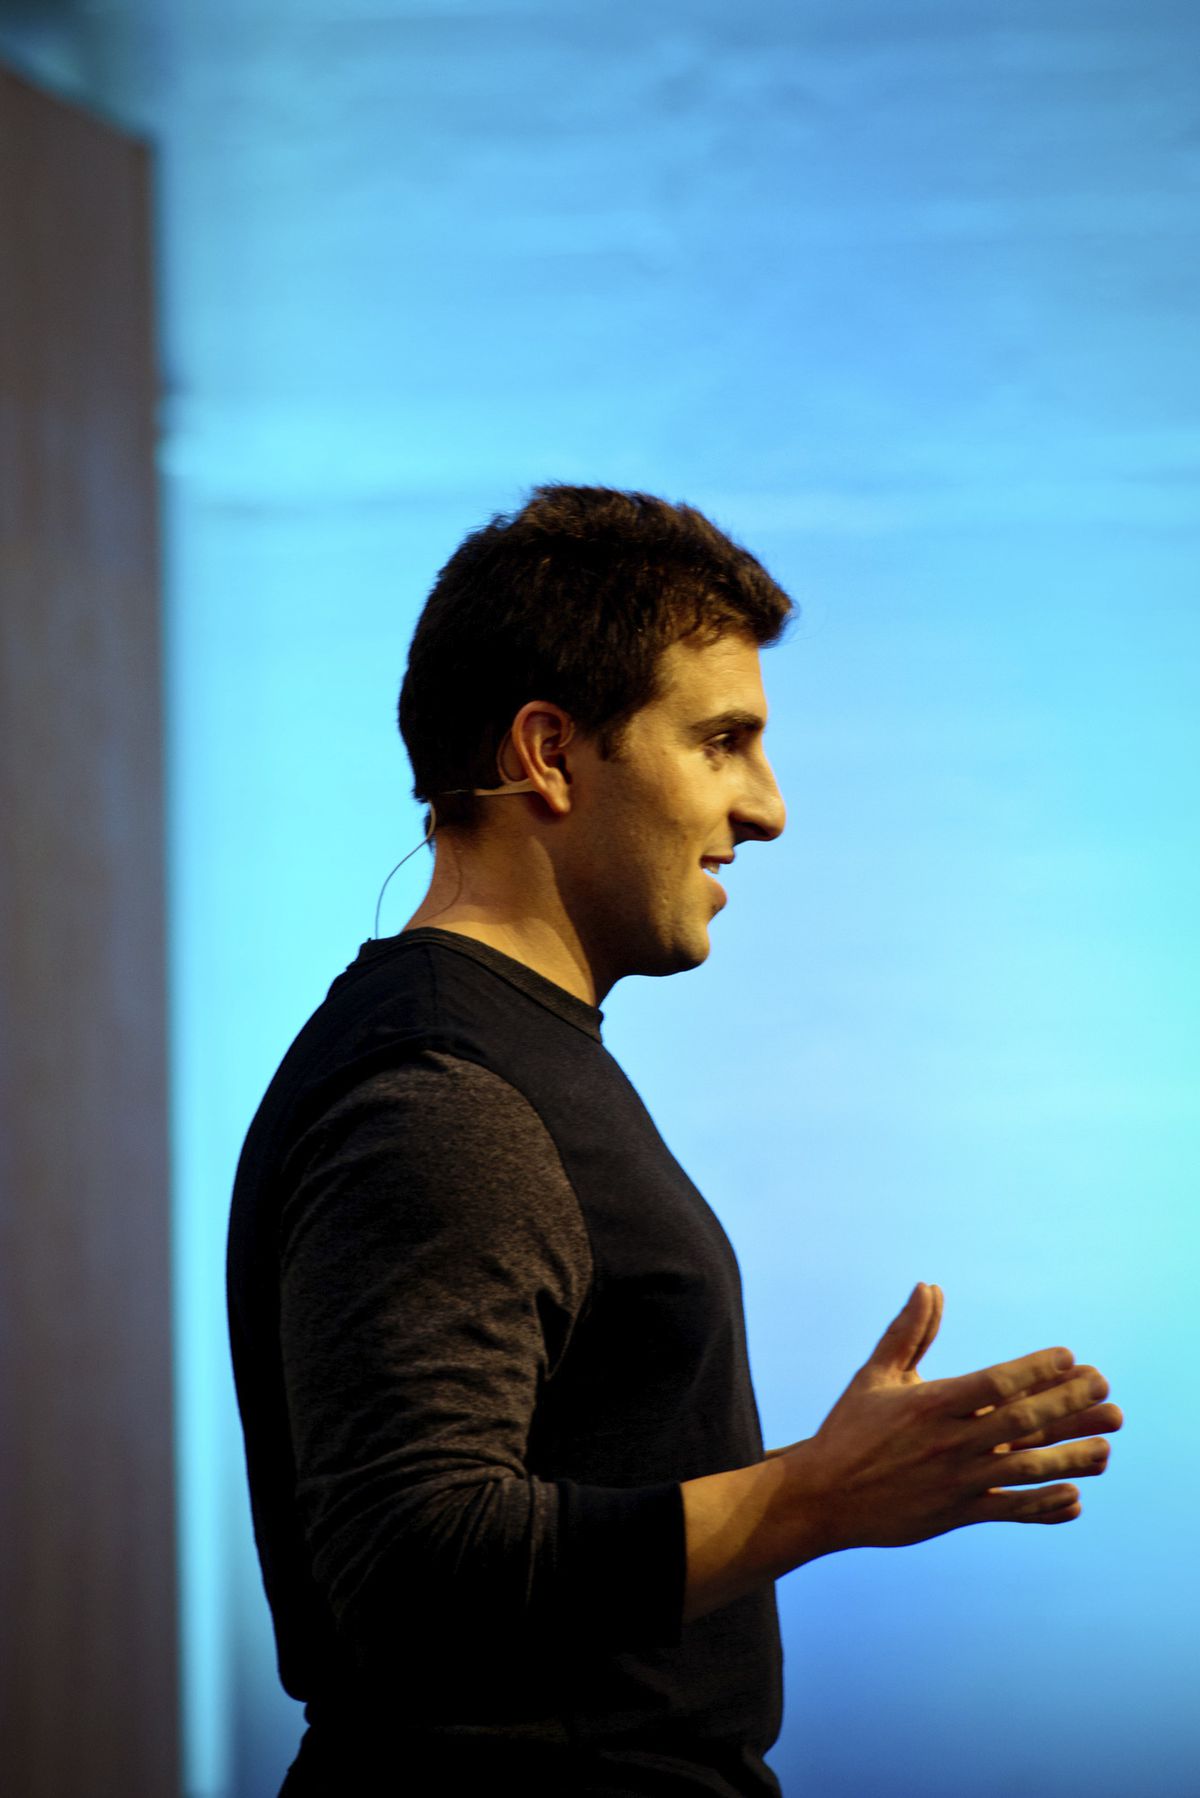  Airbnb CEO Brian Chesky